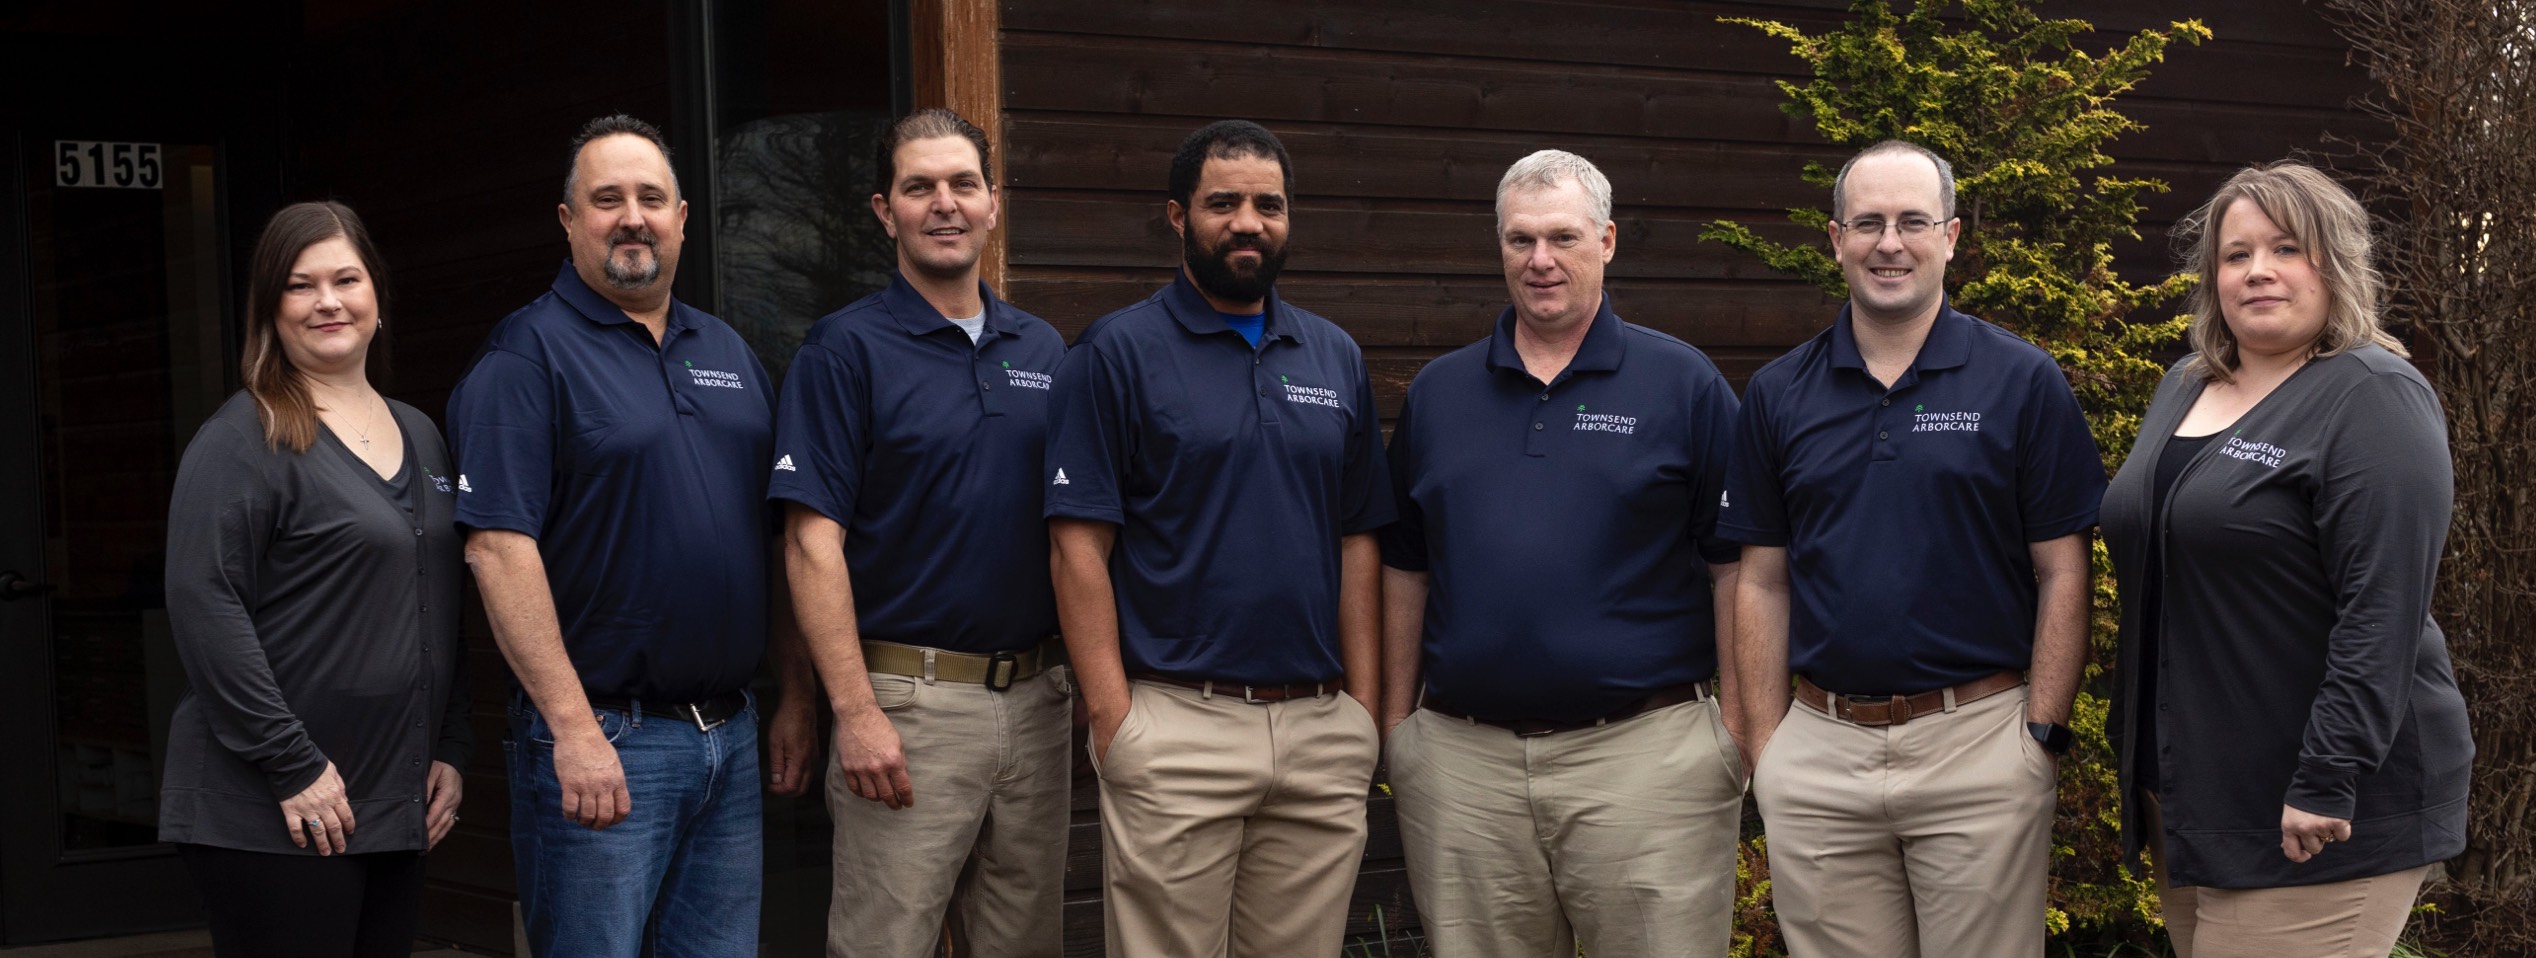 Our entire team stands ready to consult with you and find the right tree care service for your home or property.